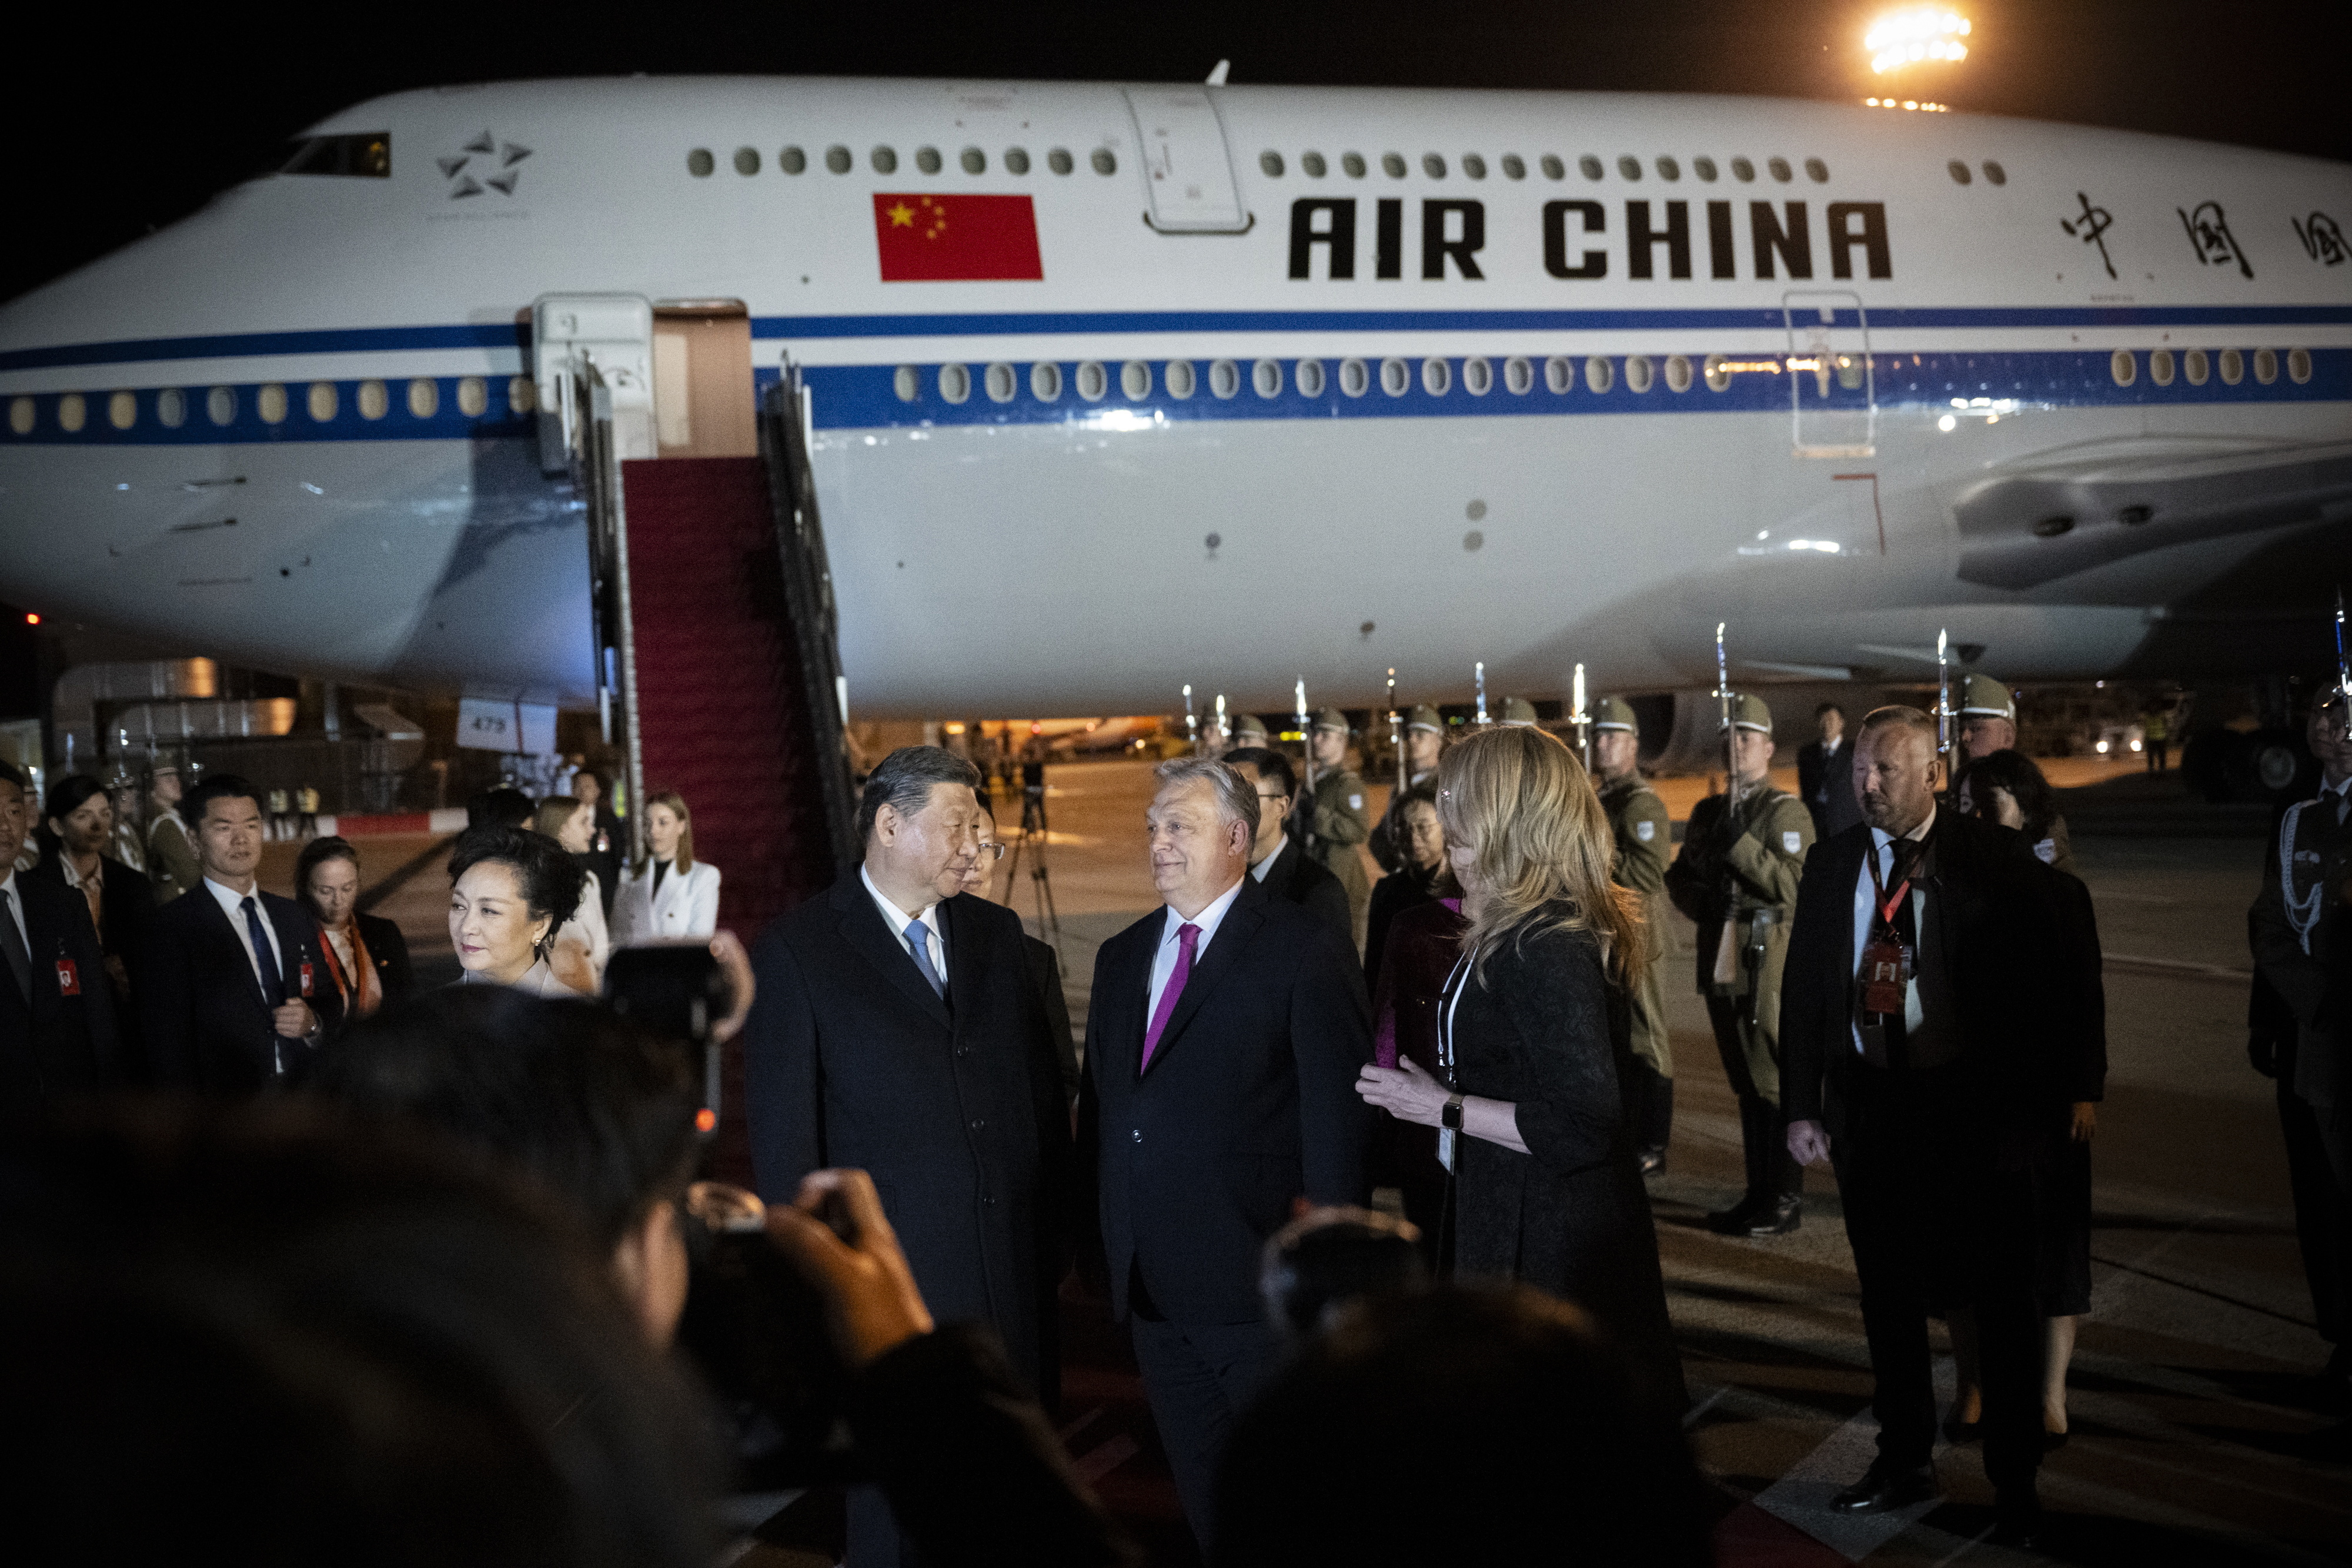 Orbán Welcomes Xi to Hungary